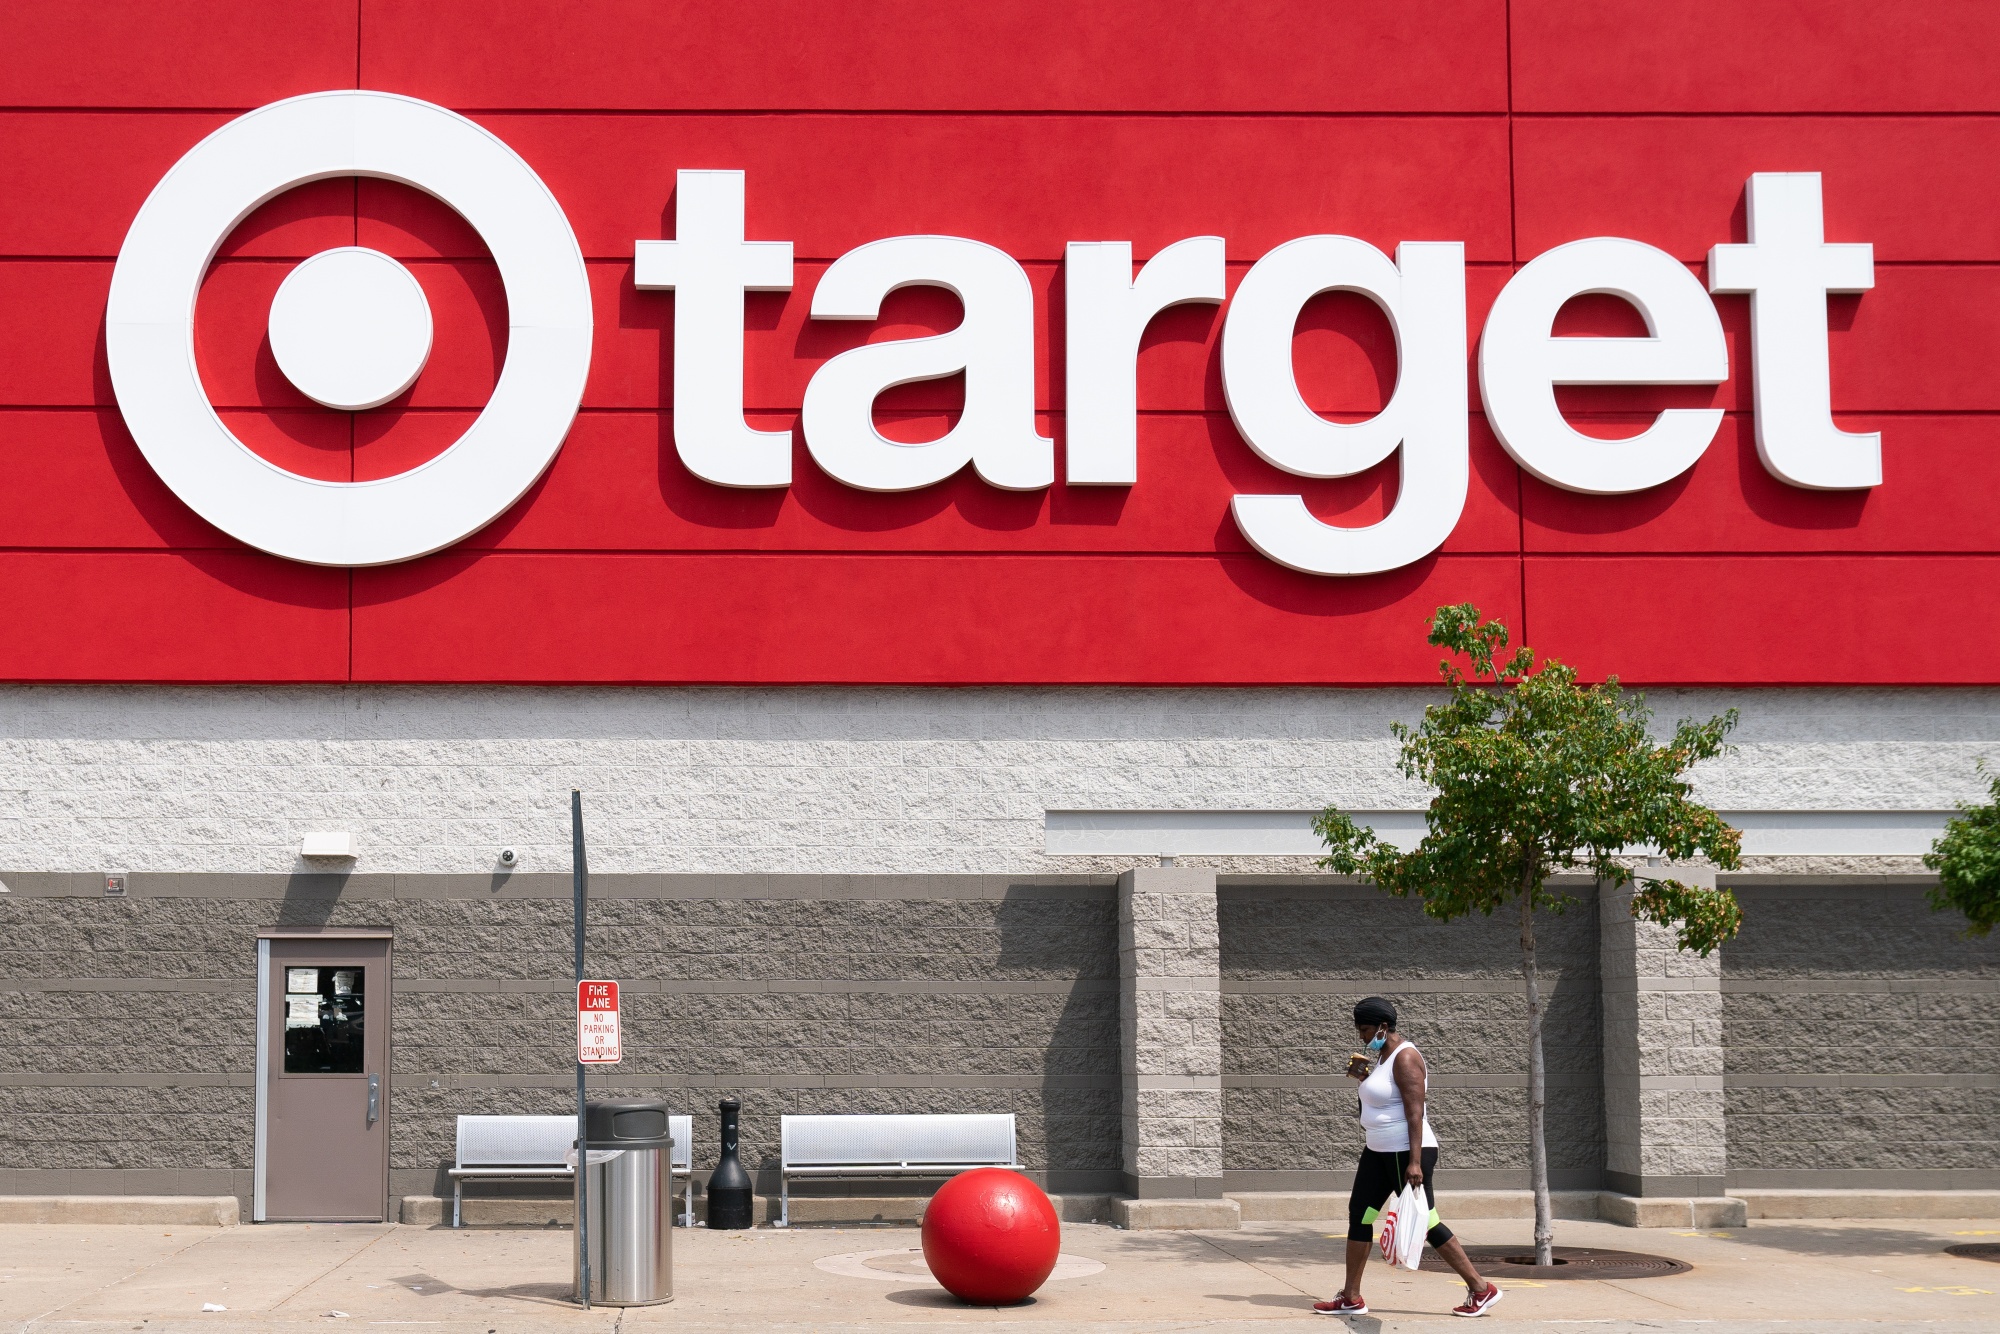 Target (TGT) Stock Rises on Record Sales Growth, Rising Store Visits - Bloomberg order food online near me 3/1 order online 0/1–2 deals 3/1–4 restaurants 0/4–15 food 7/1–3 restaurant 0/1–3 browser 0/1–6 delivery 15/2–6 rest 1/1–2 door 0/1 sign 0/1–2 cookies 0/1–6 results 0/2–6 inc 1/2–6 order 3/2–6 check 1/1 easy 0/1–2 find 2/1–4 type 1/2–6 makes 0/1 time 3/1–3